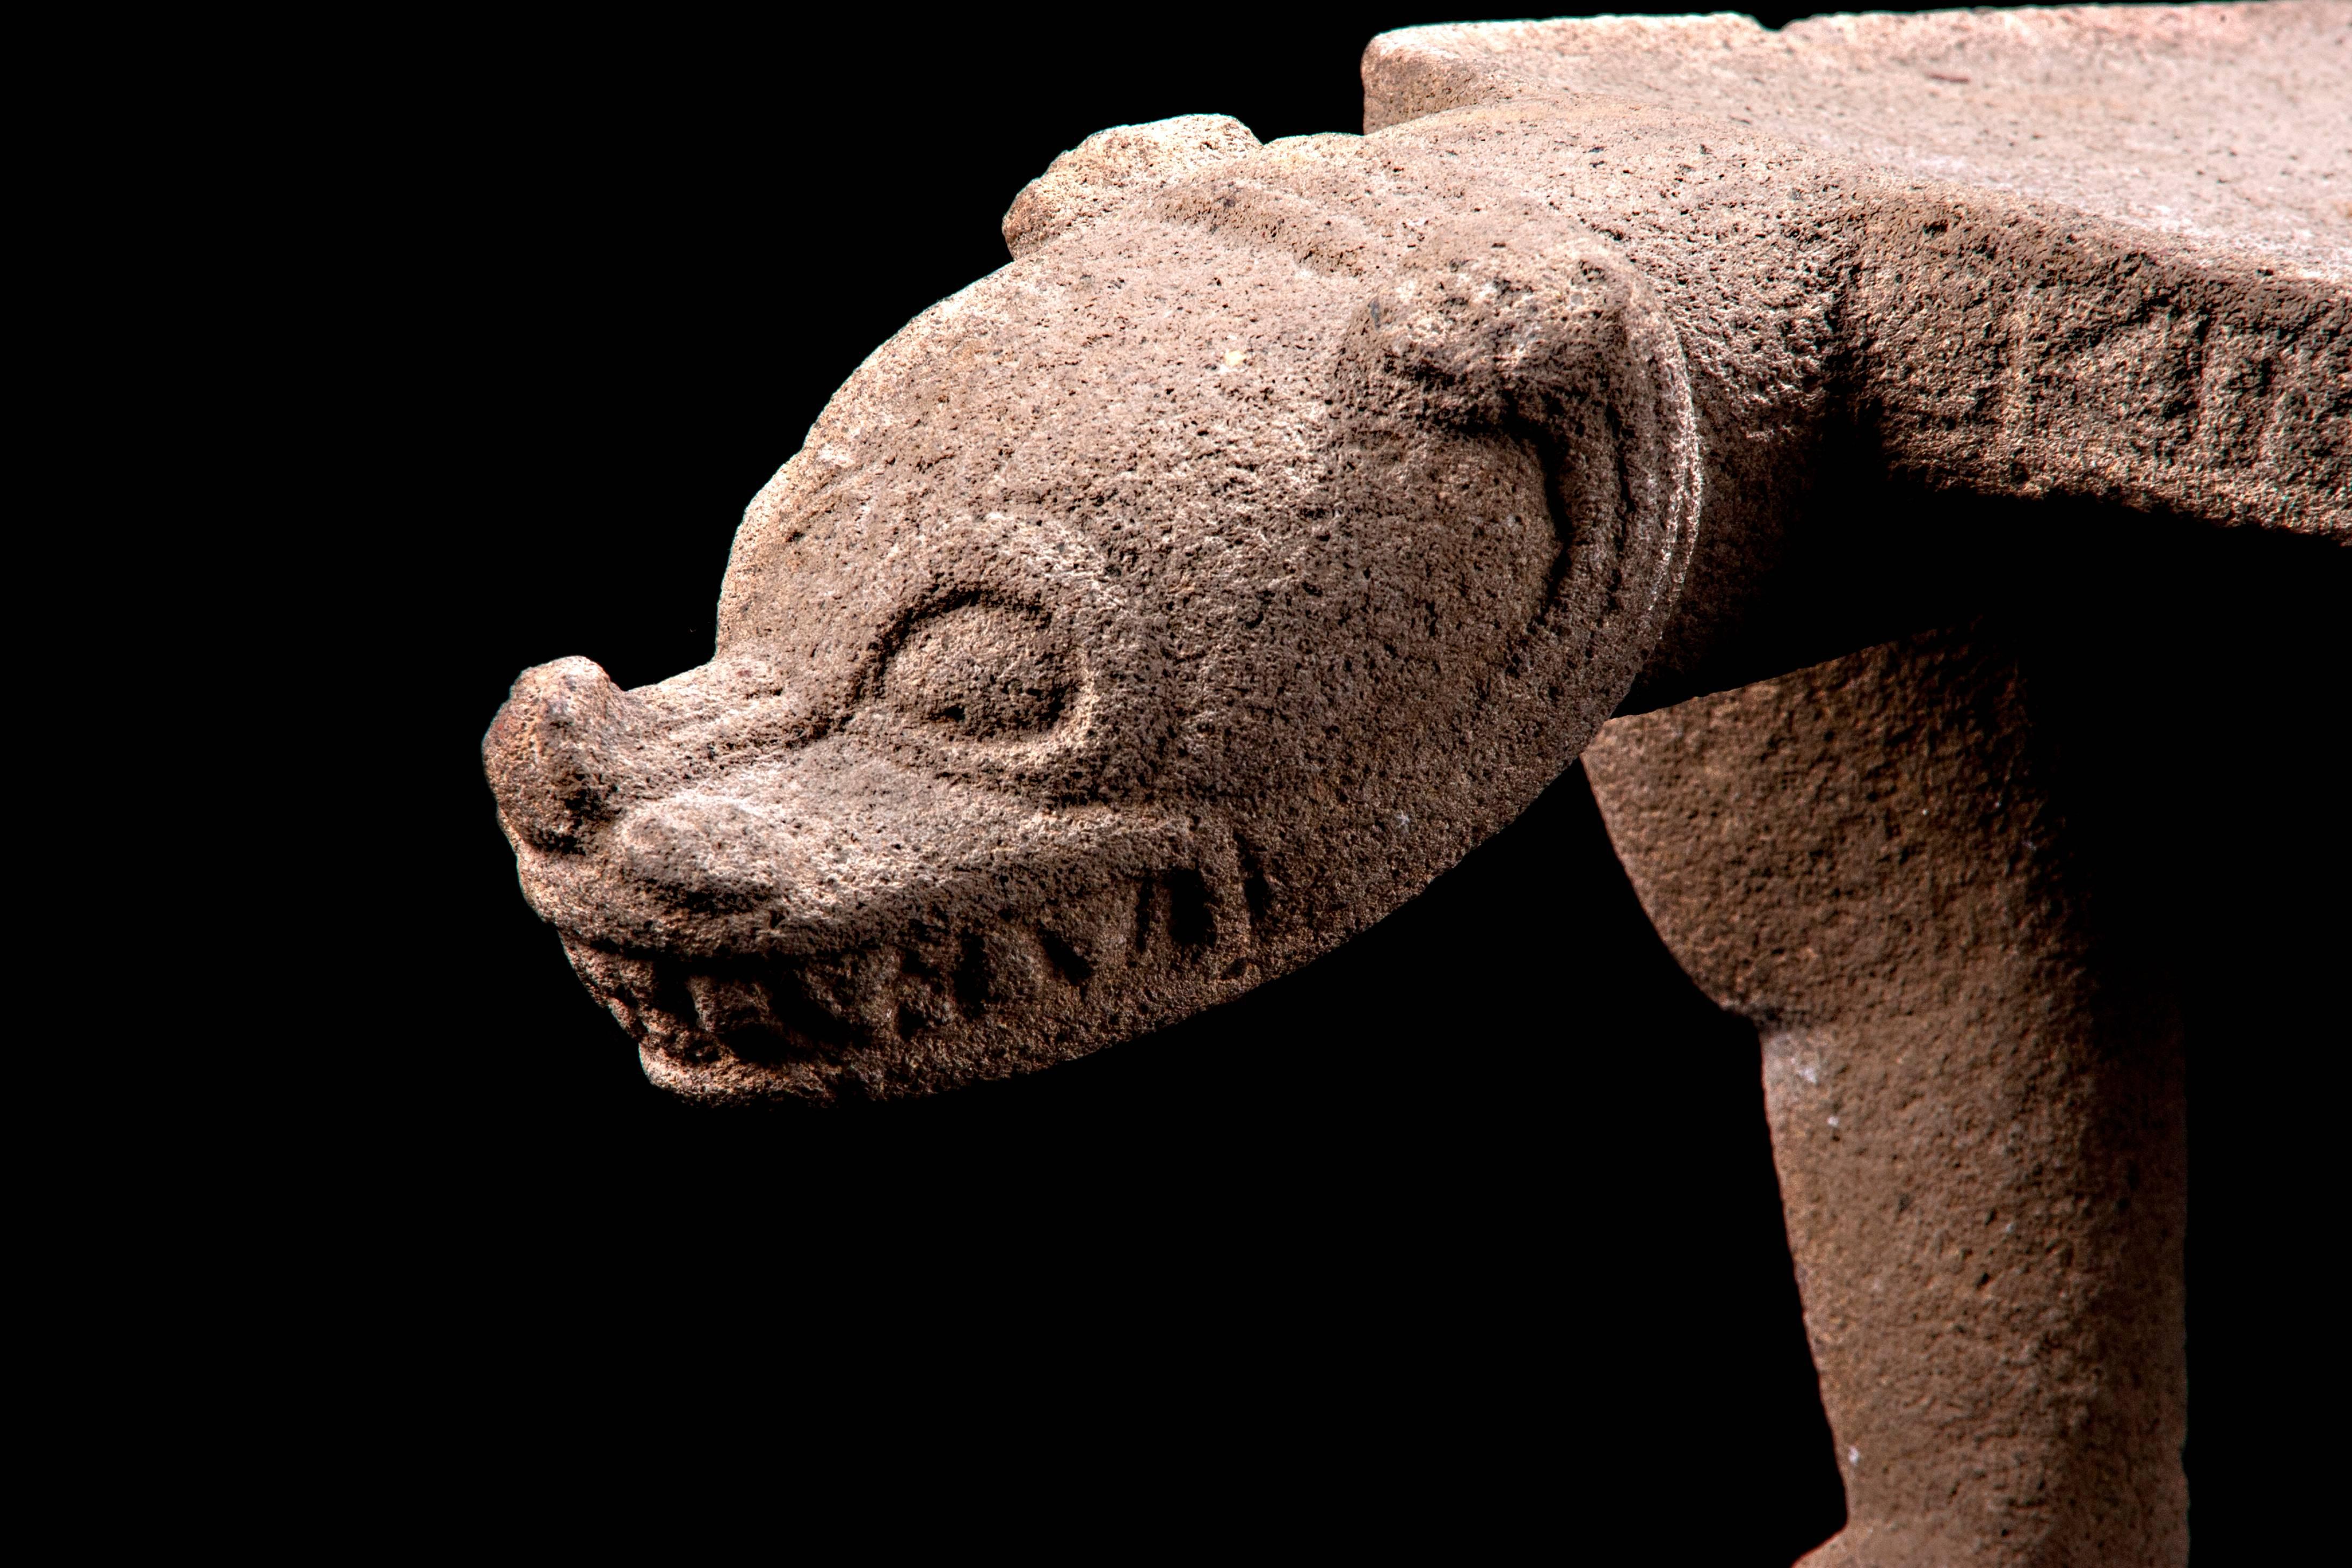 Nicoya Ceremonial Basalt Stone Seat in Shape of a Jaguar. Published in the Arizona Museum. 

This large and finely carved example of Costa Rican skill and craftsmanship is in the form of a jaguar which may have been a lineage or clan symbol - as